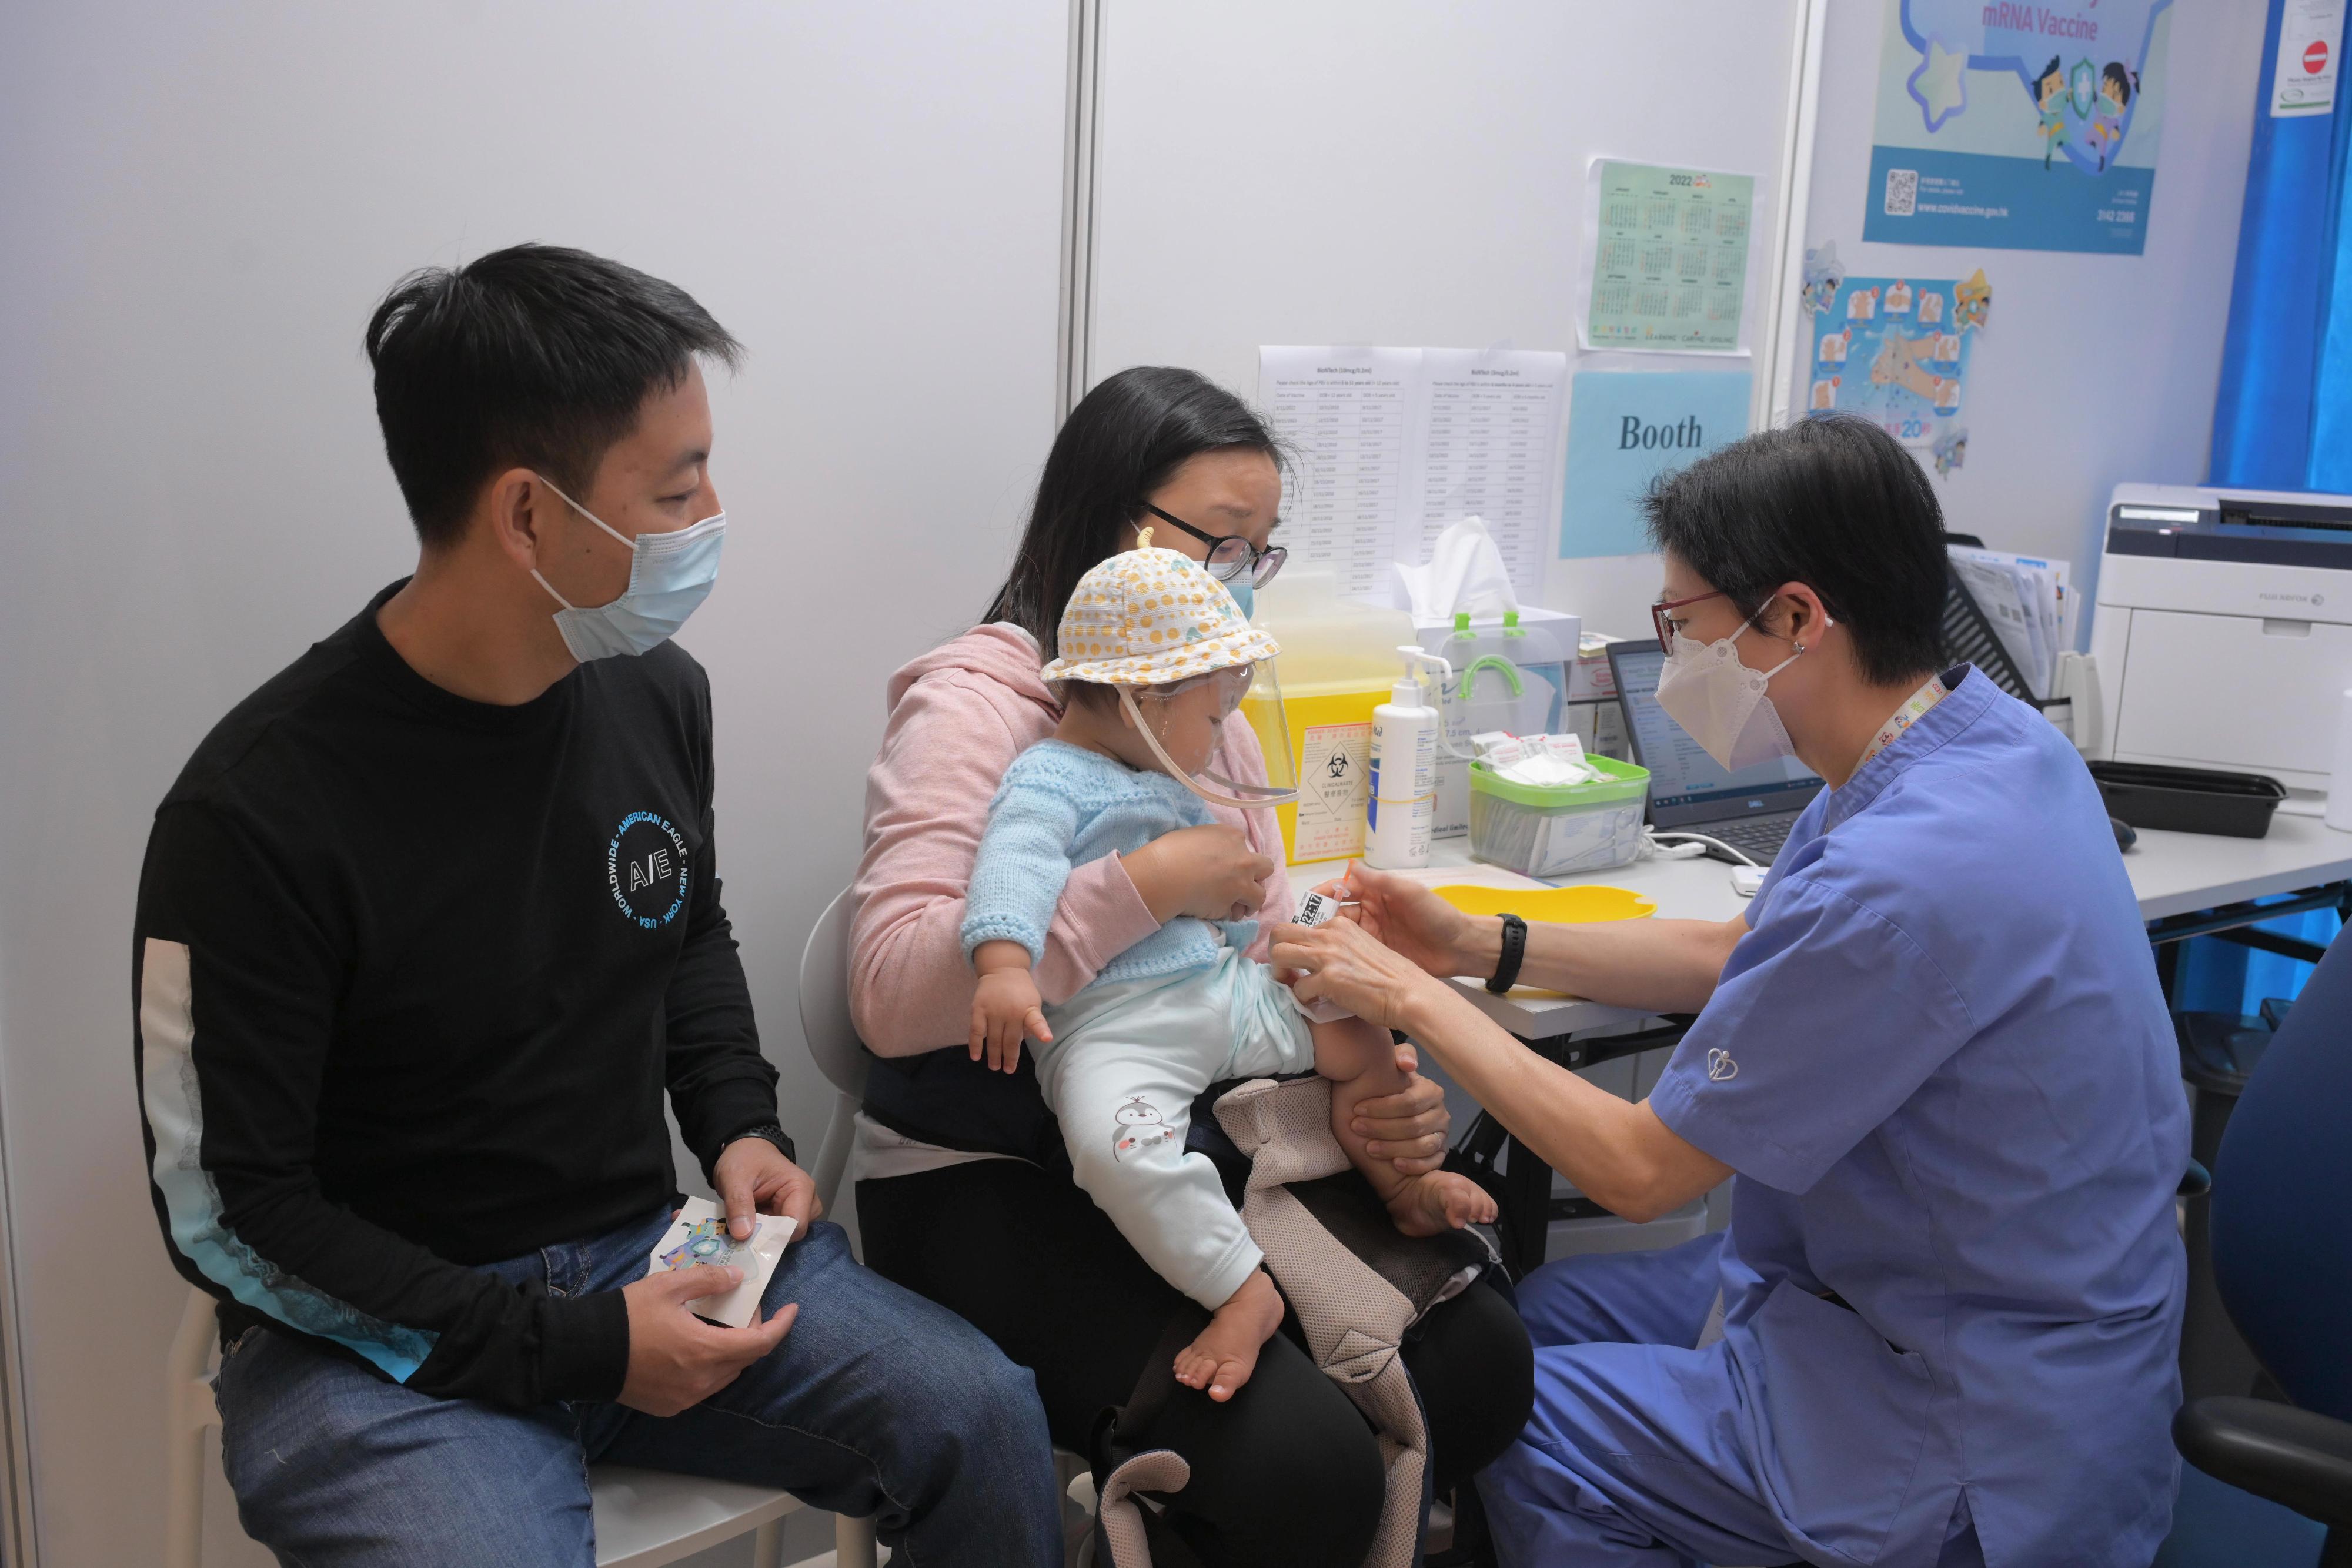 Starting from today (November 9), children aged between 6 months and 4 years could receive free vaccination of toddler formulation of the BioNTech vaccine at the four Children Community Vaccination Centres (CCVCs). Photo shows a child receiving vaccination of toddler formulation of the BioNTech vaccine at Hong Kong Children's Hospital CCVC. 